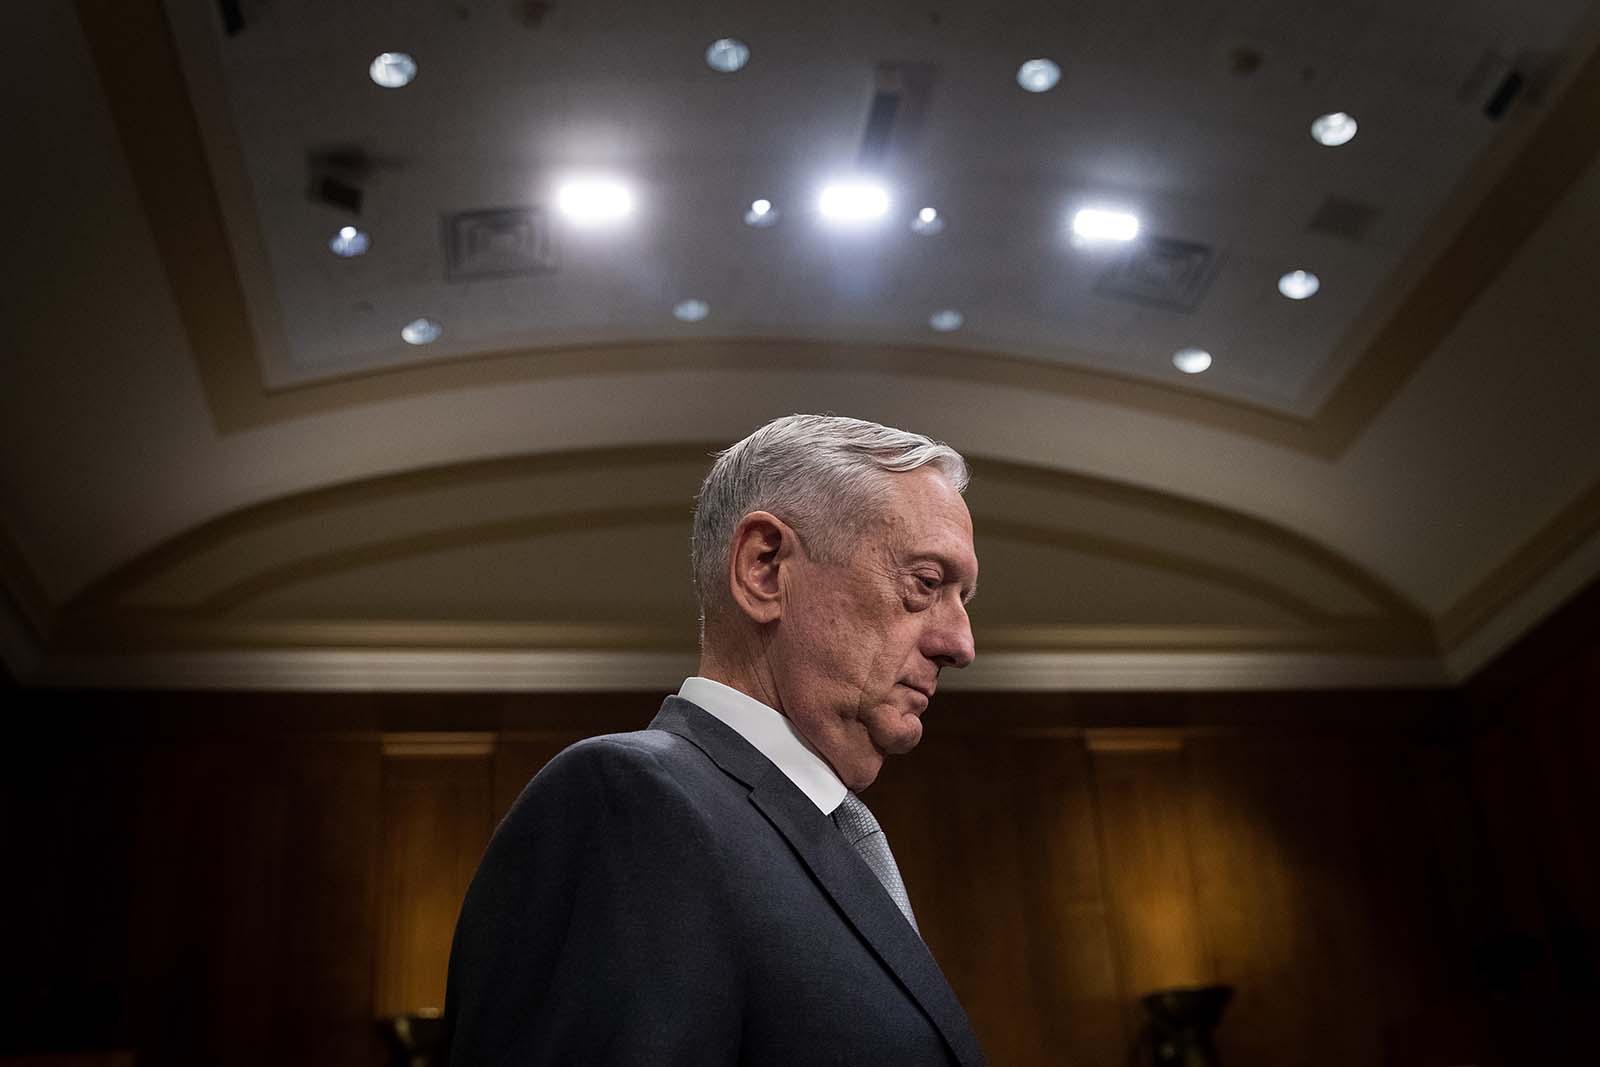 James Mattis arrives for a Senate Foreign Relations Committee hearing concerning the authorizations for use of military force, October 30, 2017 in Washington.